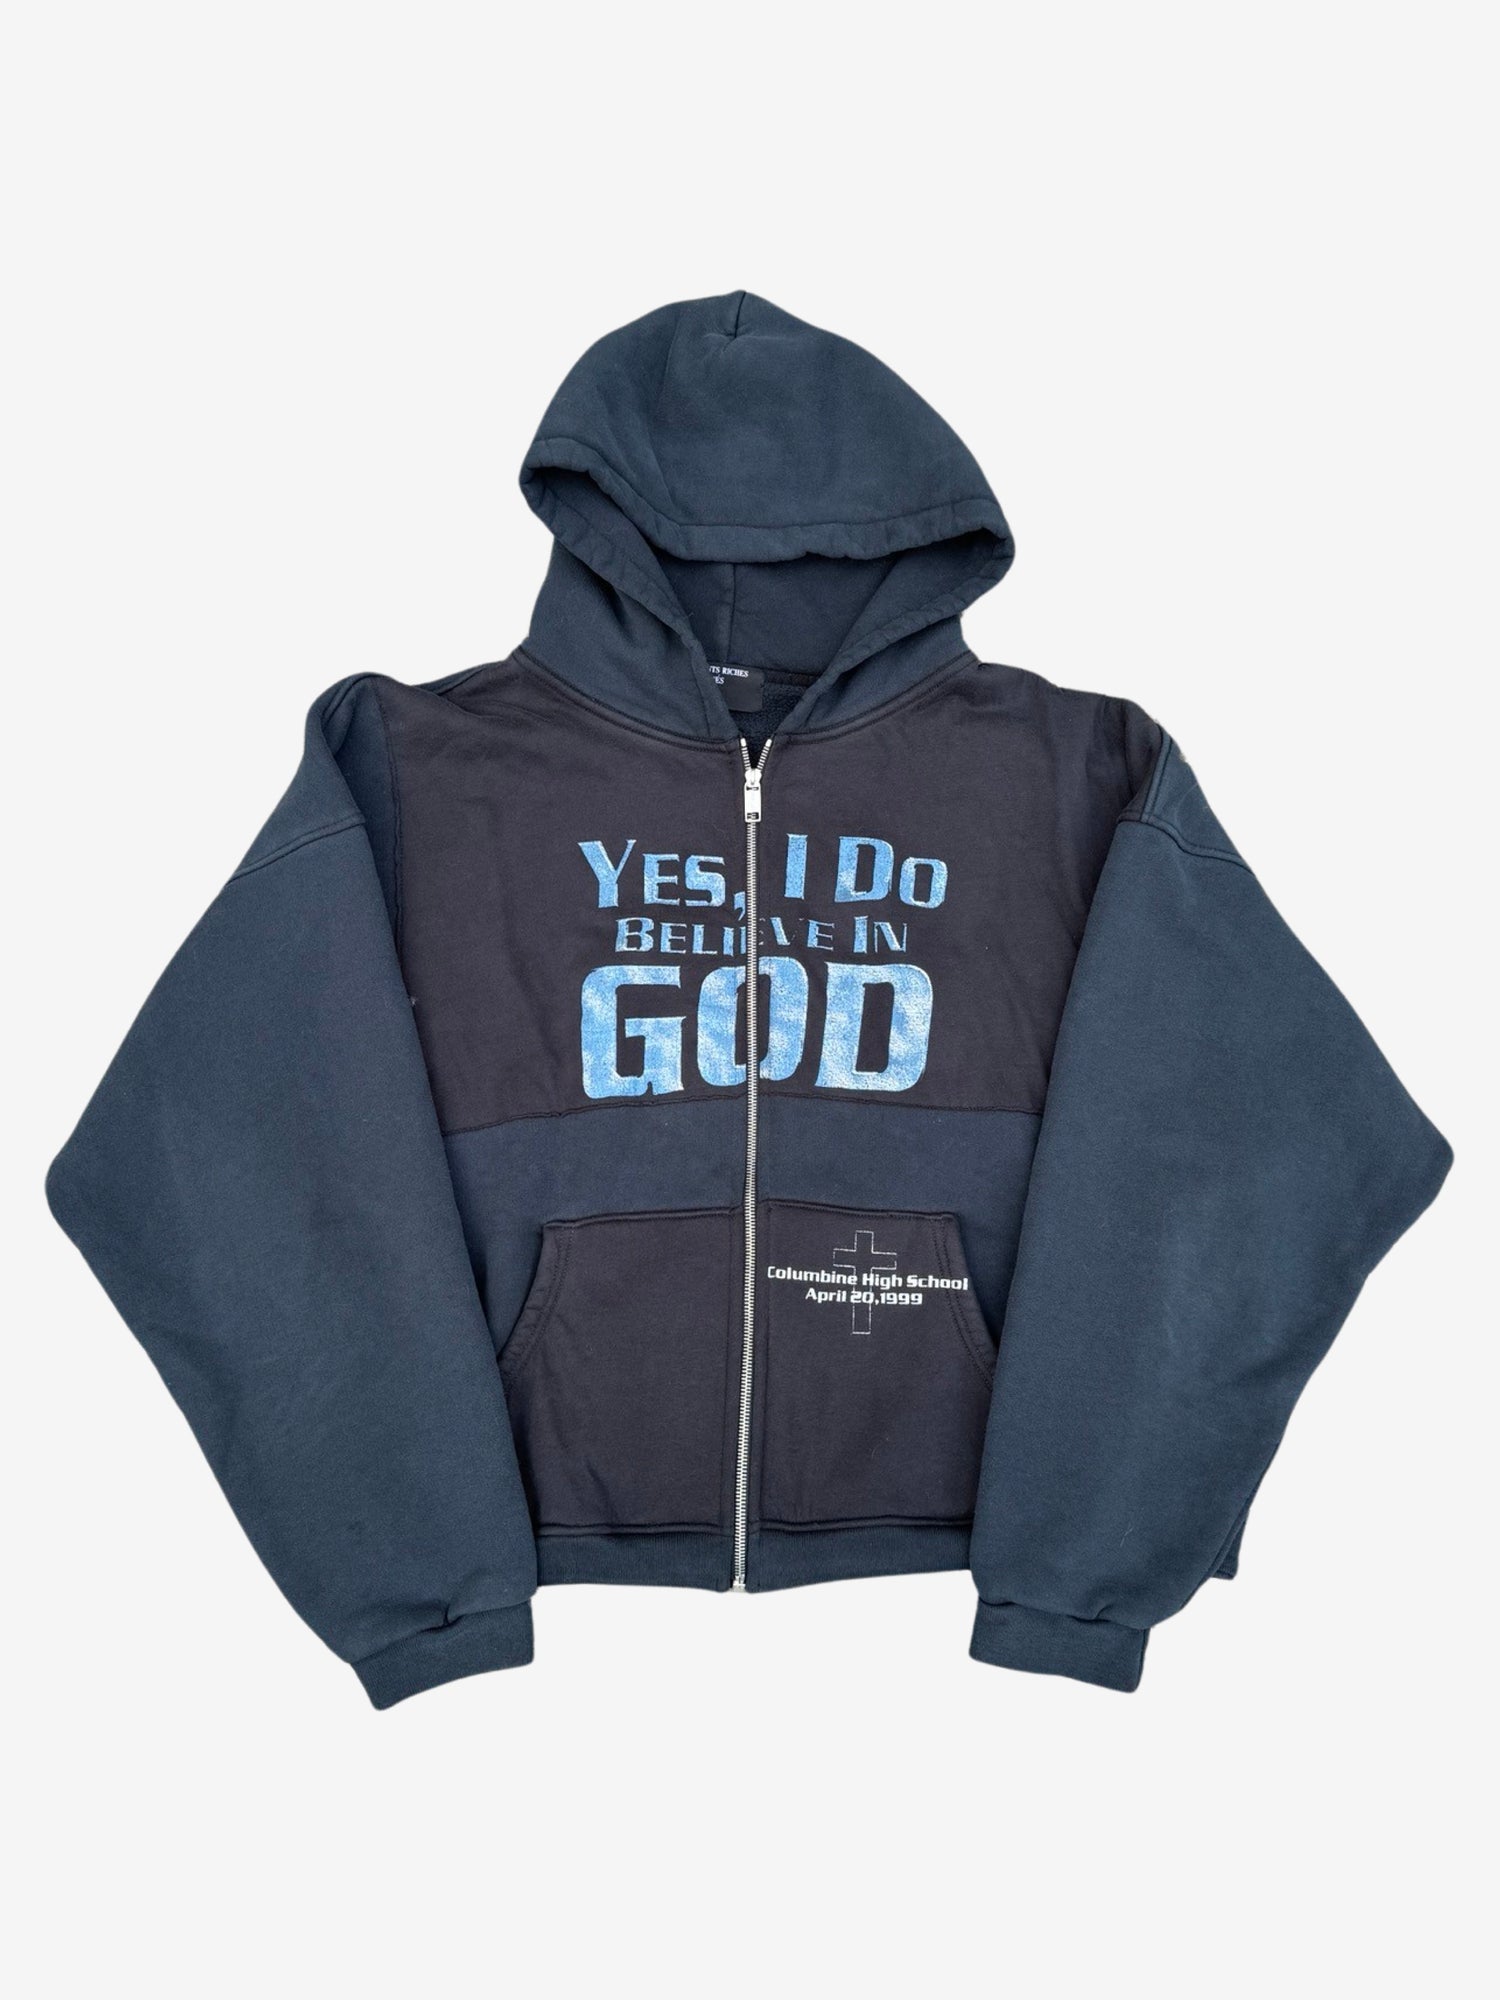 Enfant Riches Deprimes "Yes i believe in God" SS24 Zip Hoodie